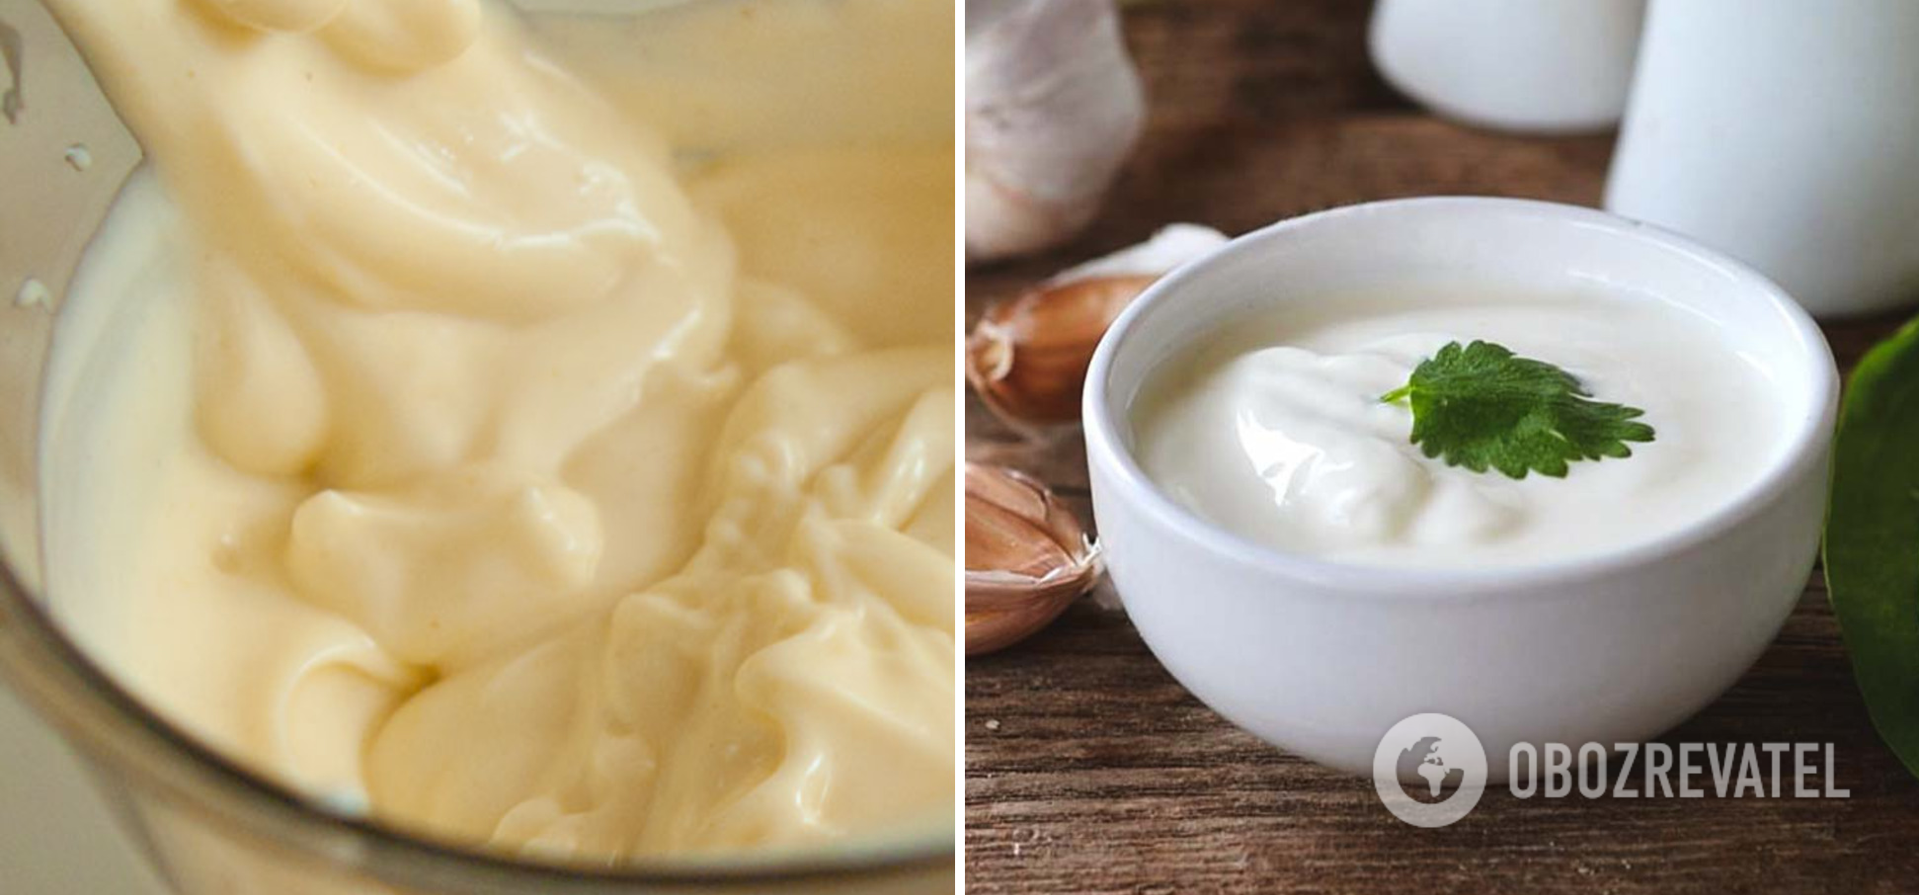 How to cook mayonnaise correctly